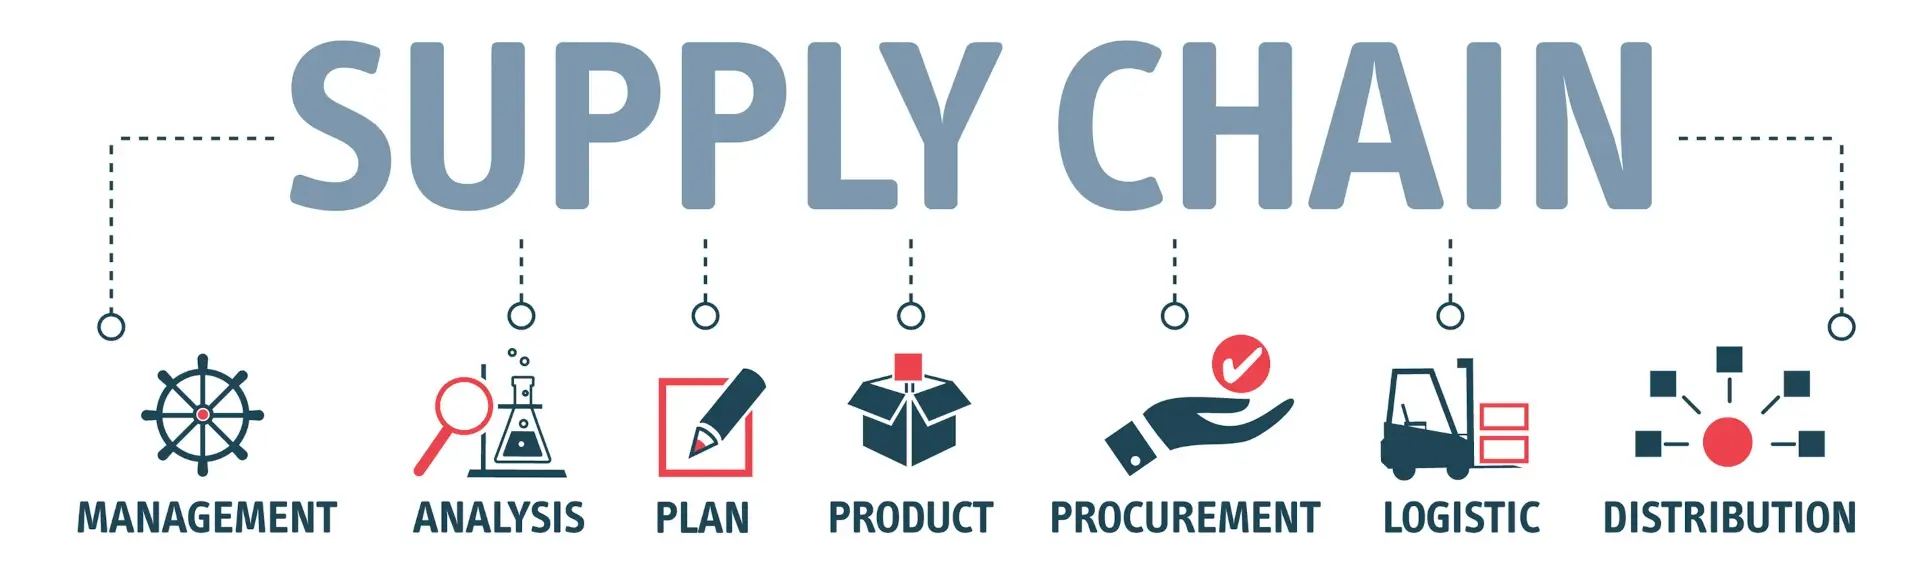 Supply chain infographic